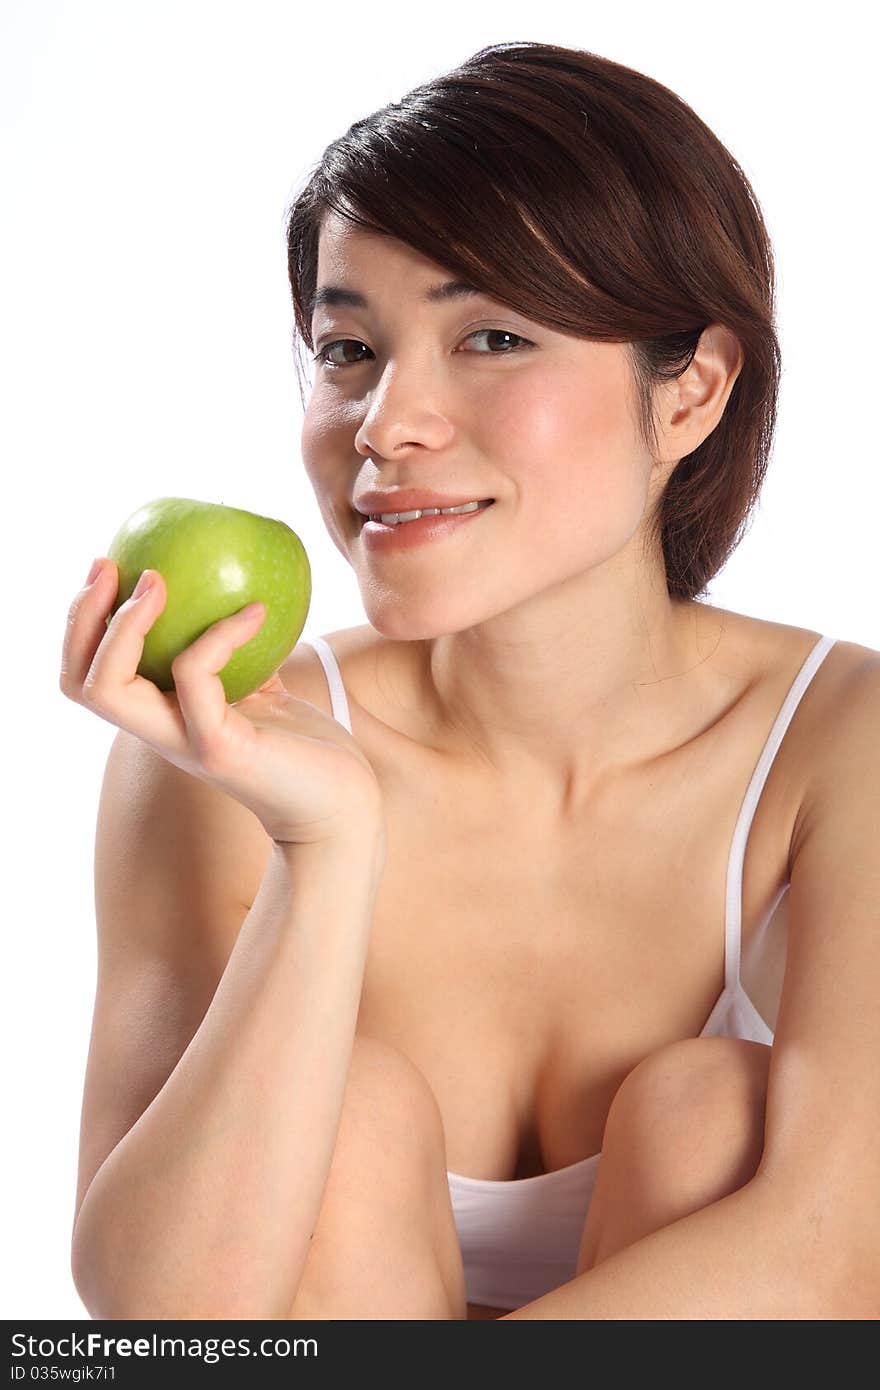 Beautiful young Japanese girl, wearing white sports underwear, sitting down holding a green apple. Model has lovely smile to camera. Beautiful young Japanese girl, wearing white sports underwear, sitting down holding a green apple. Model has lovely smile to camera.